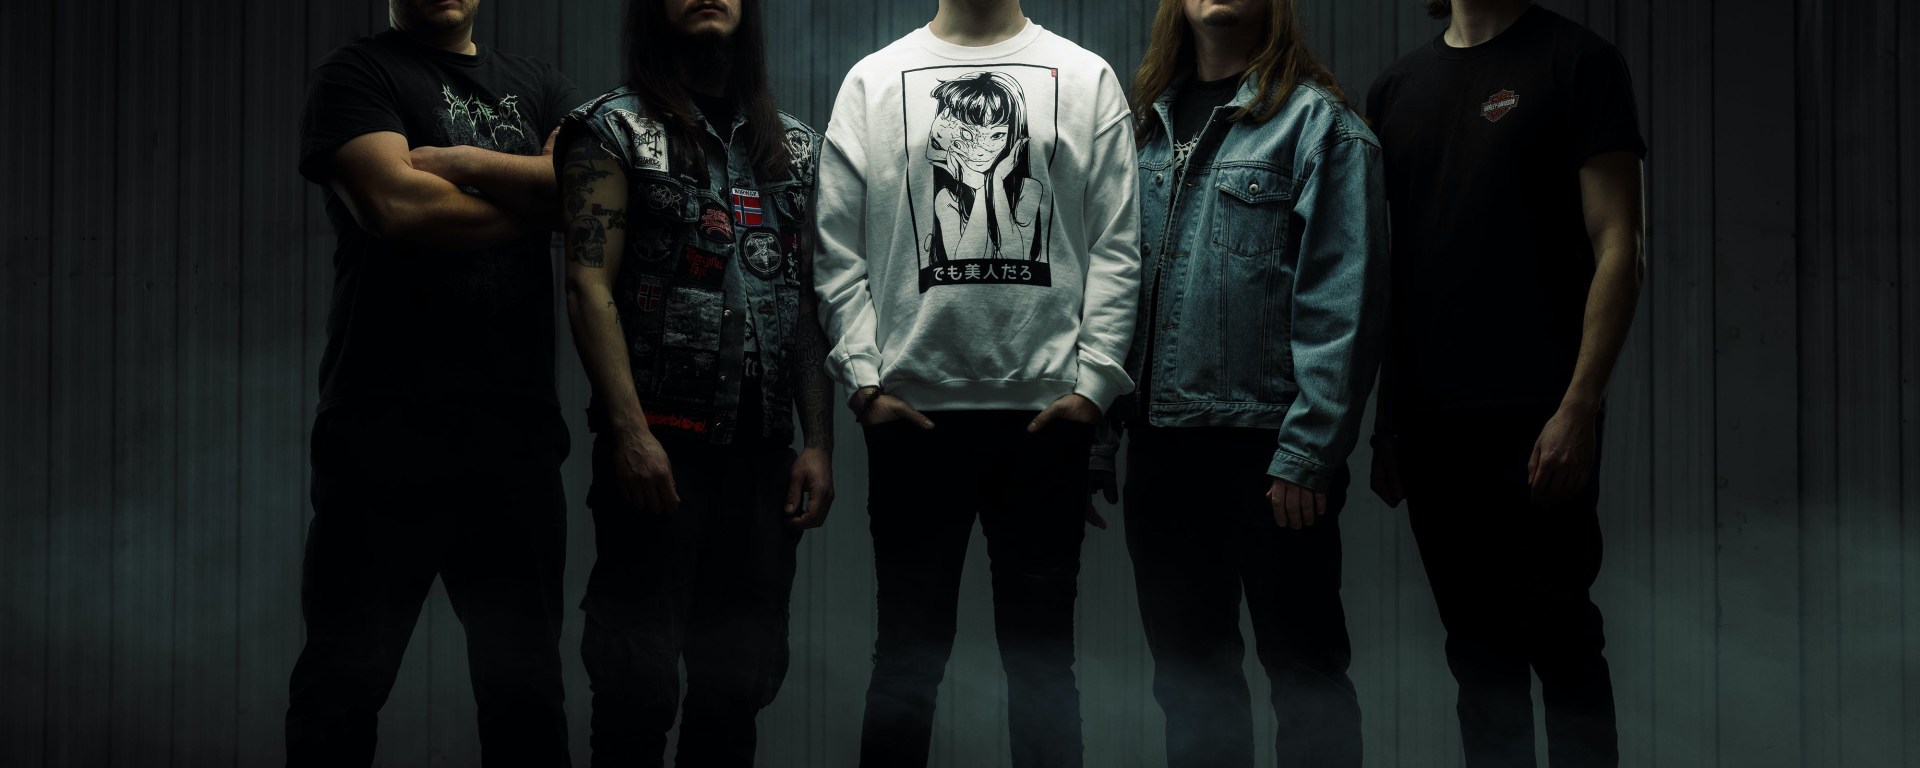 Quebec City's UPON YOUR GRAVE Announce Blistering New EP “Gold & Decay” And Single “Supremacy” - Contemporary-Establishment